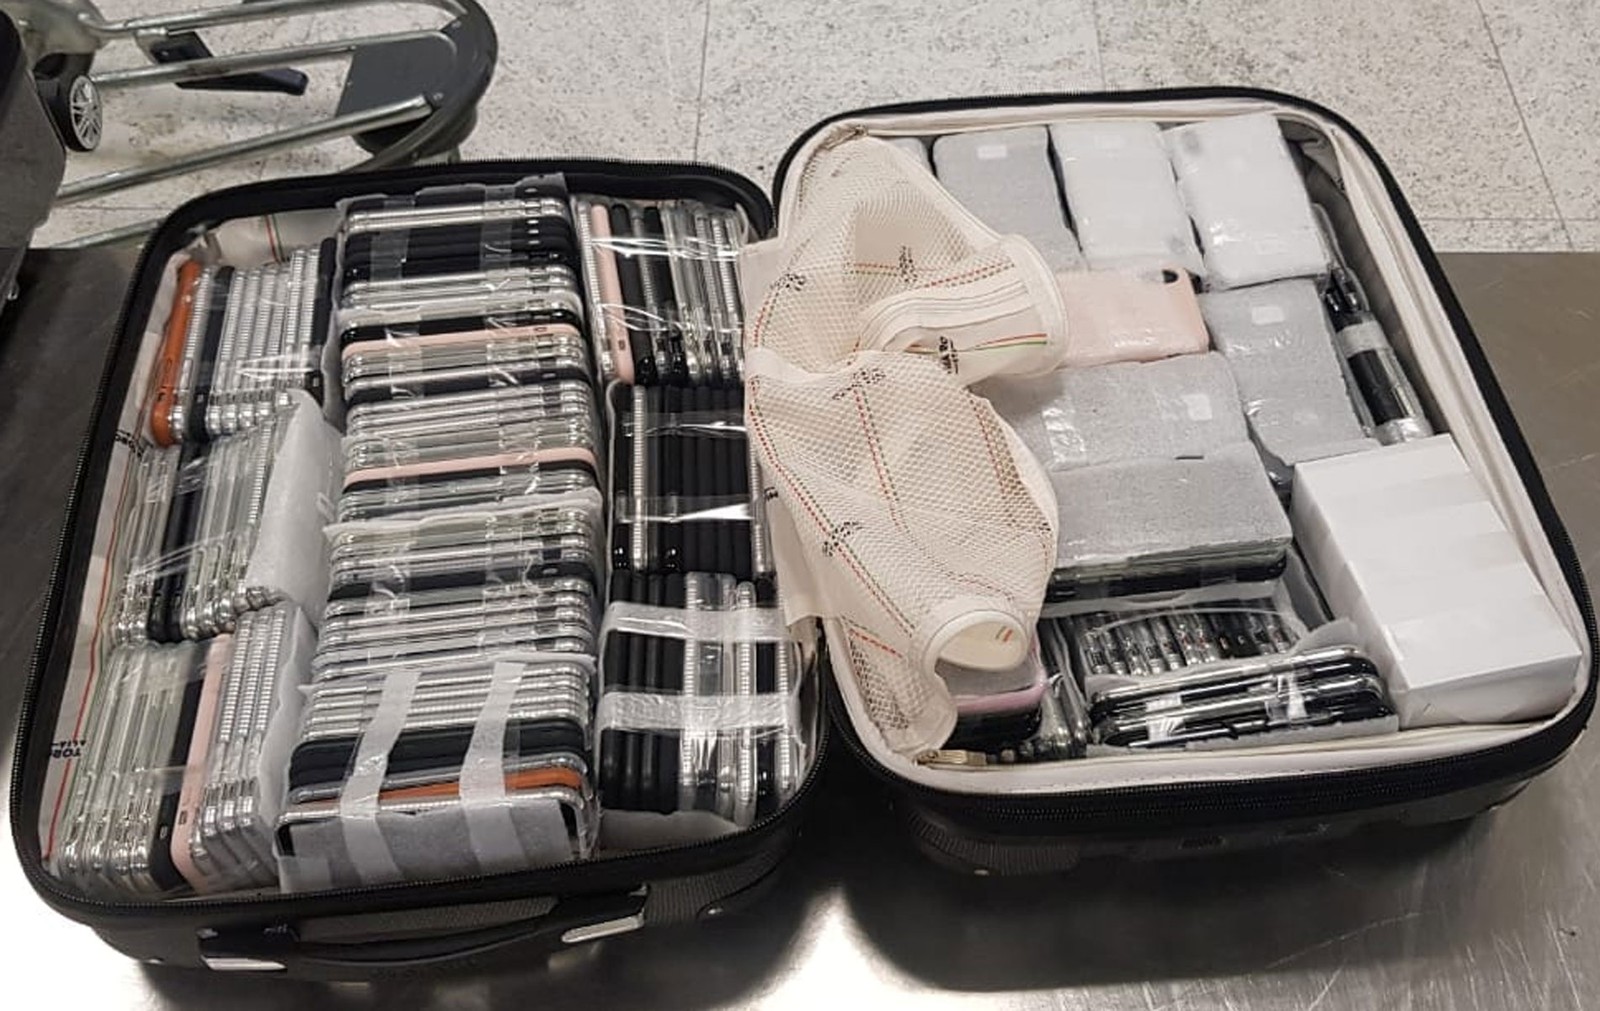 Brazilian arrested with 246 iPhones when disembarking in Guarulhos